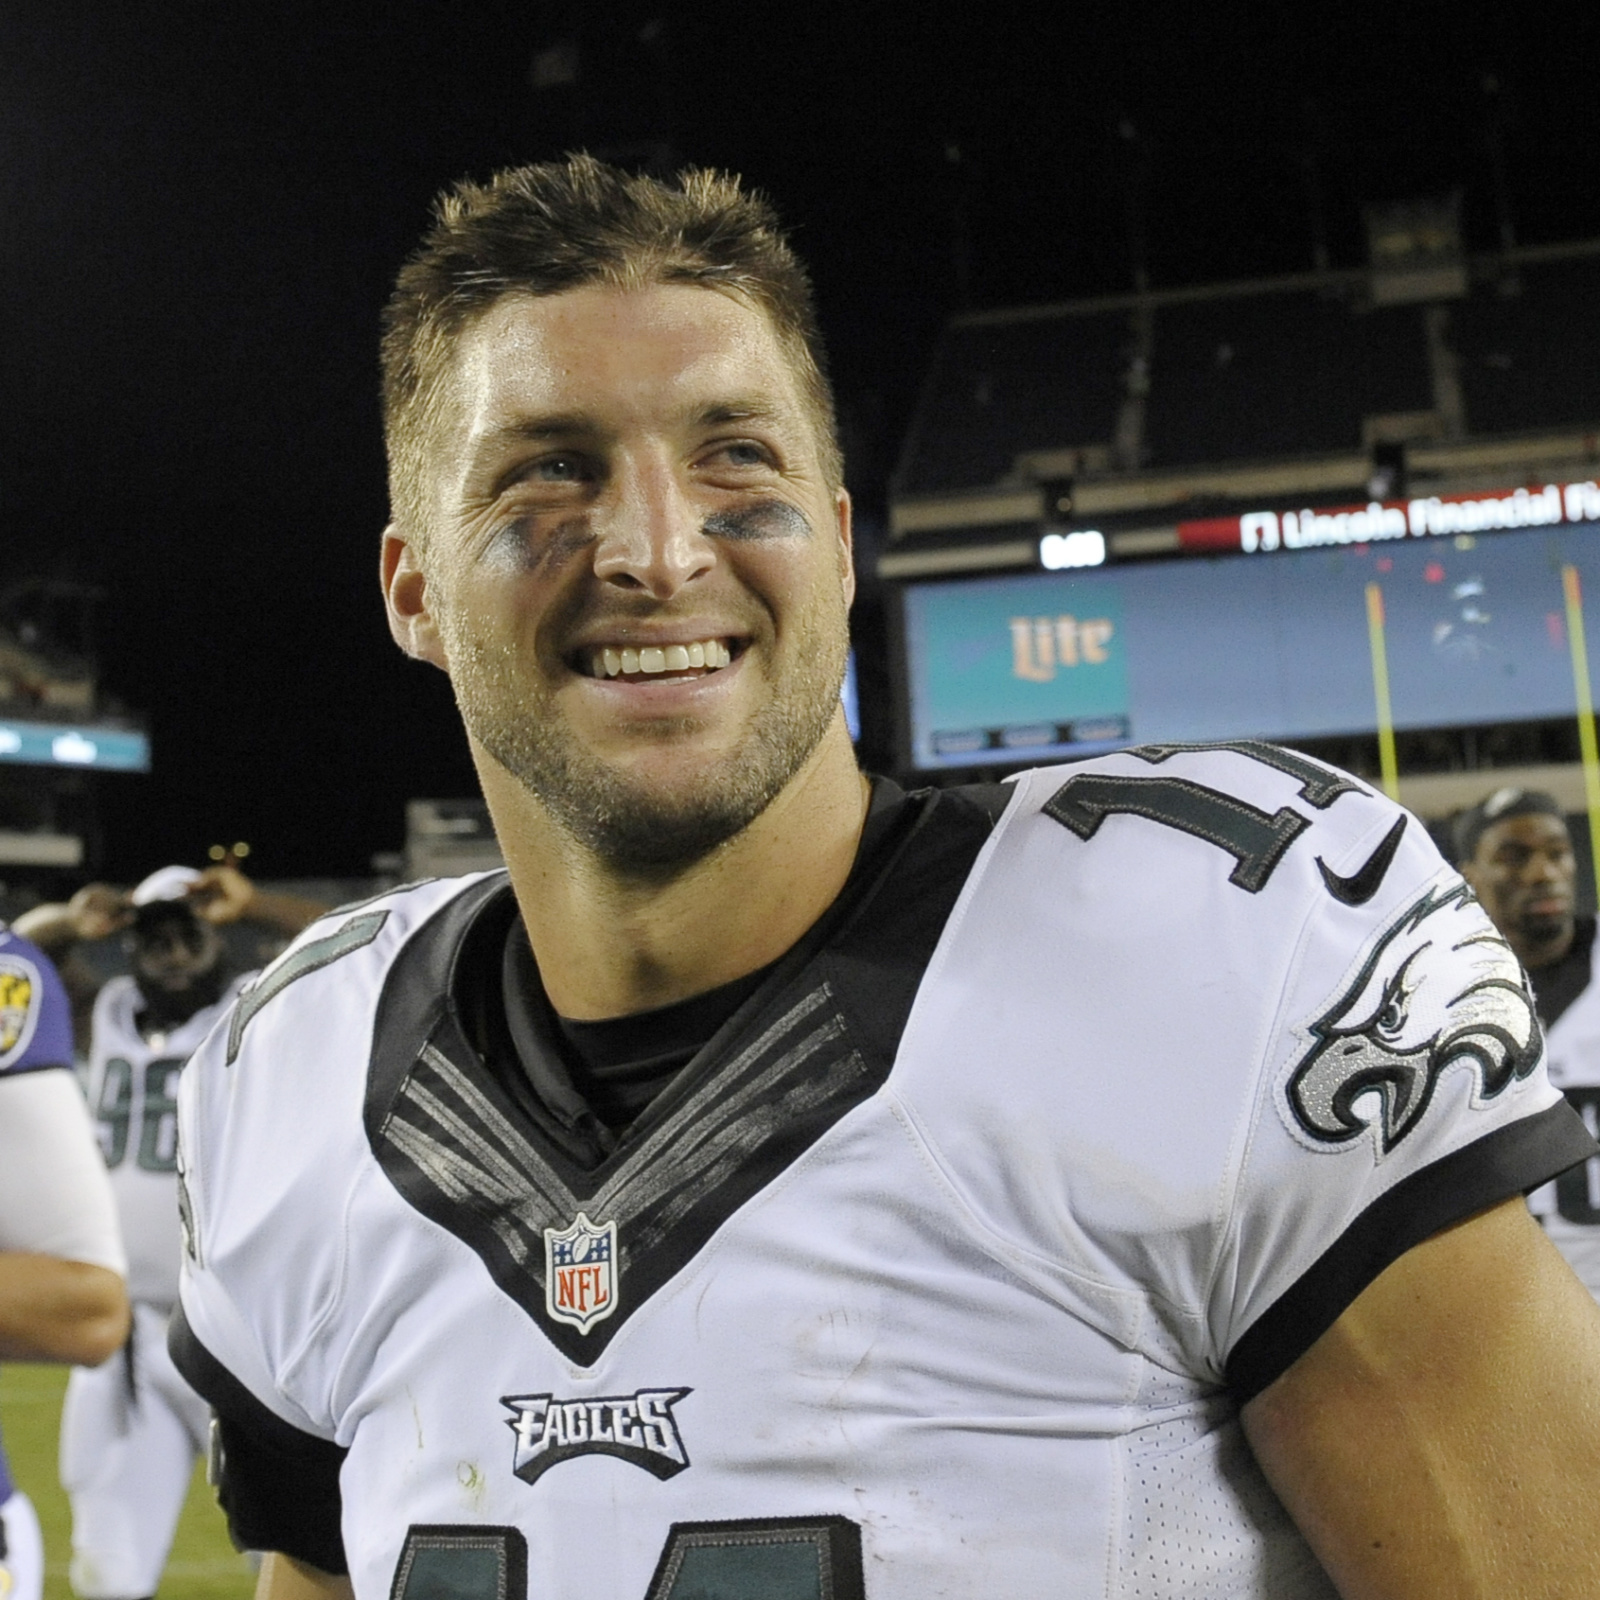 Reports: Tim Tebow to sign contract with Eagles